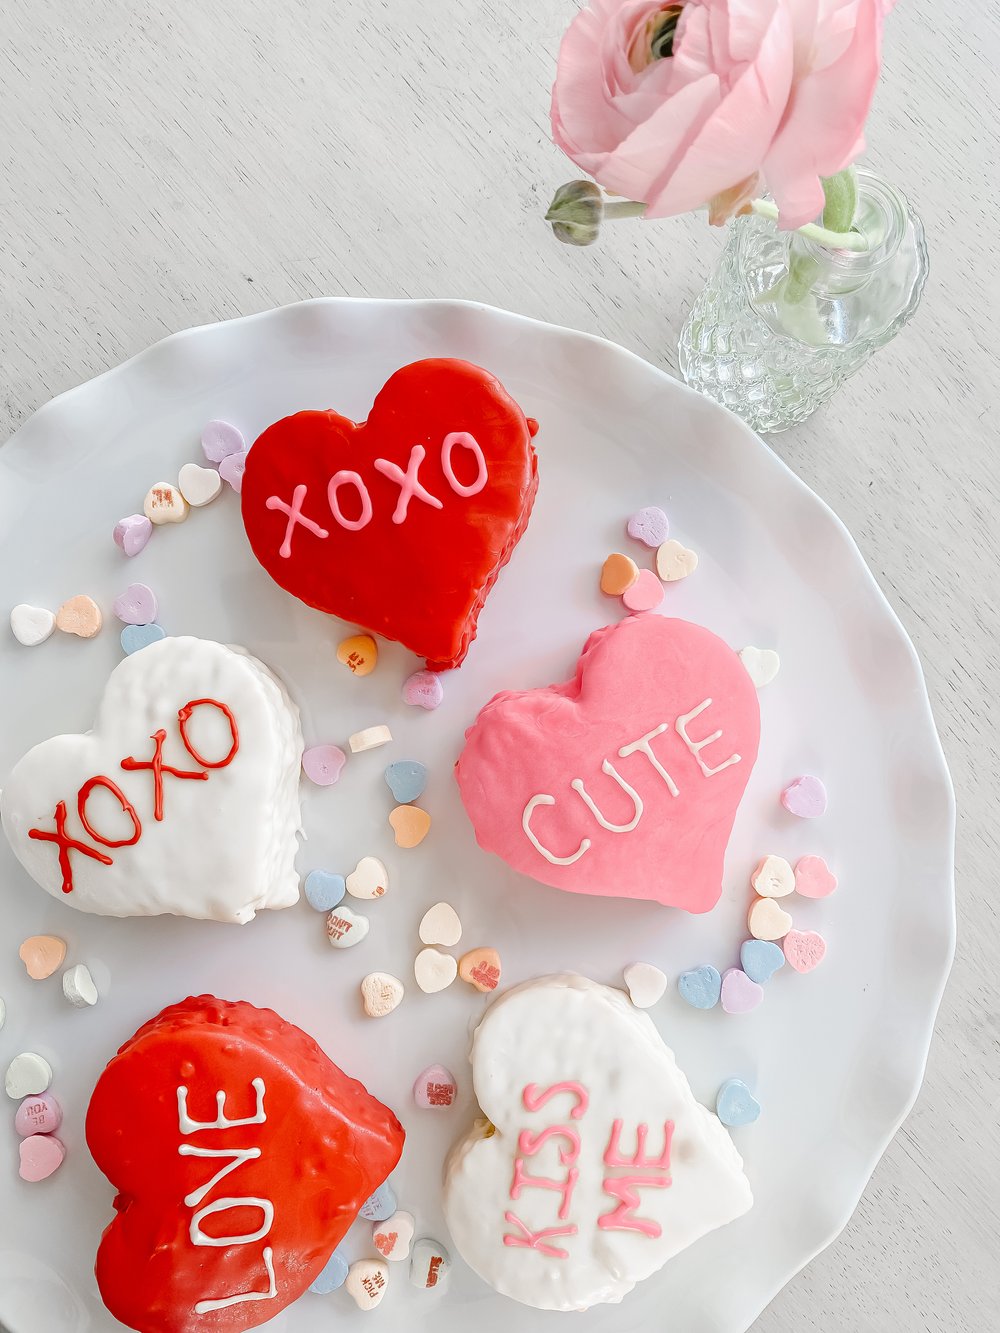 Conversation Heart Cakes for Valentine's Day — From Scratch with ...